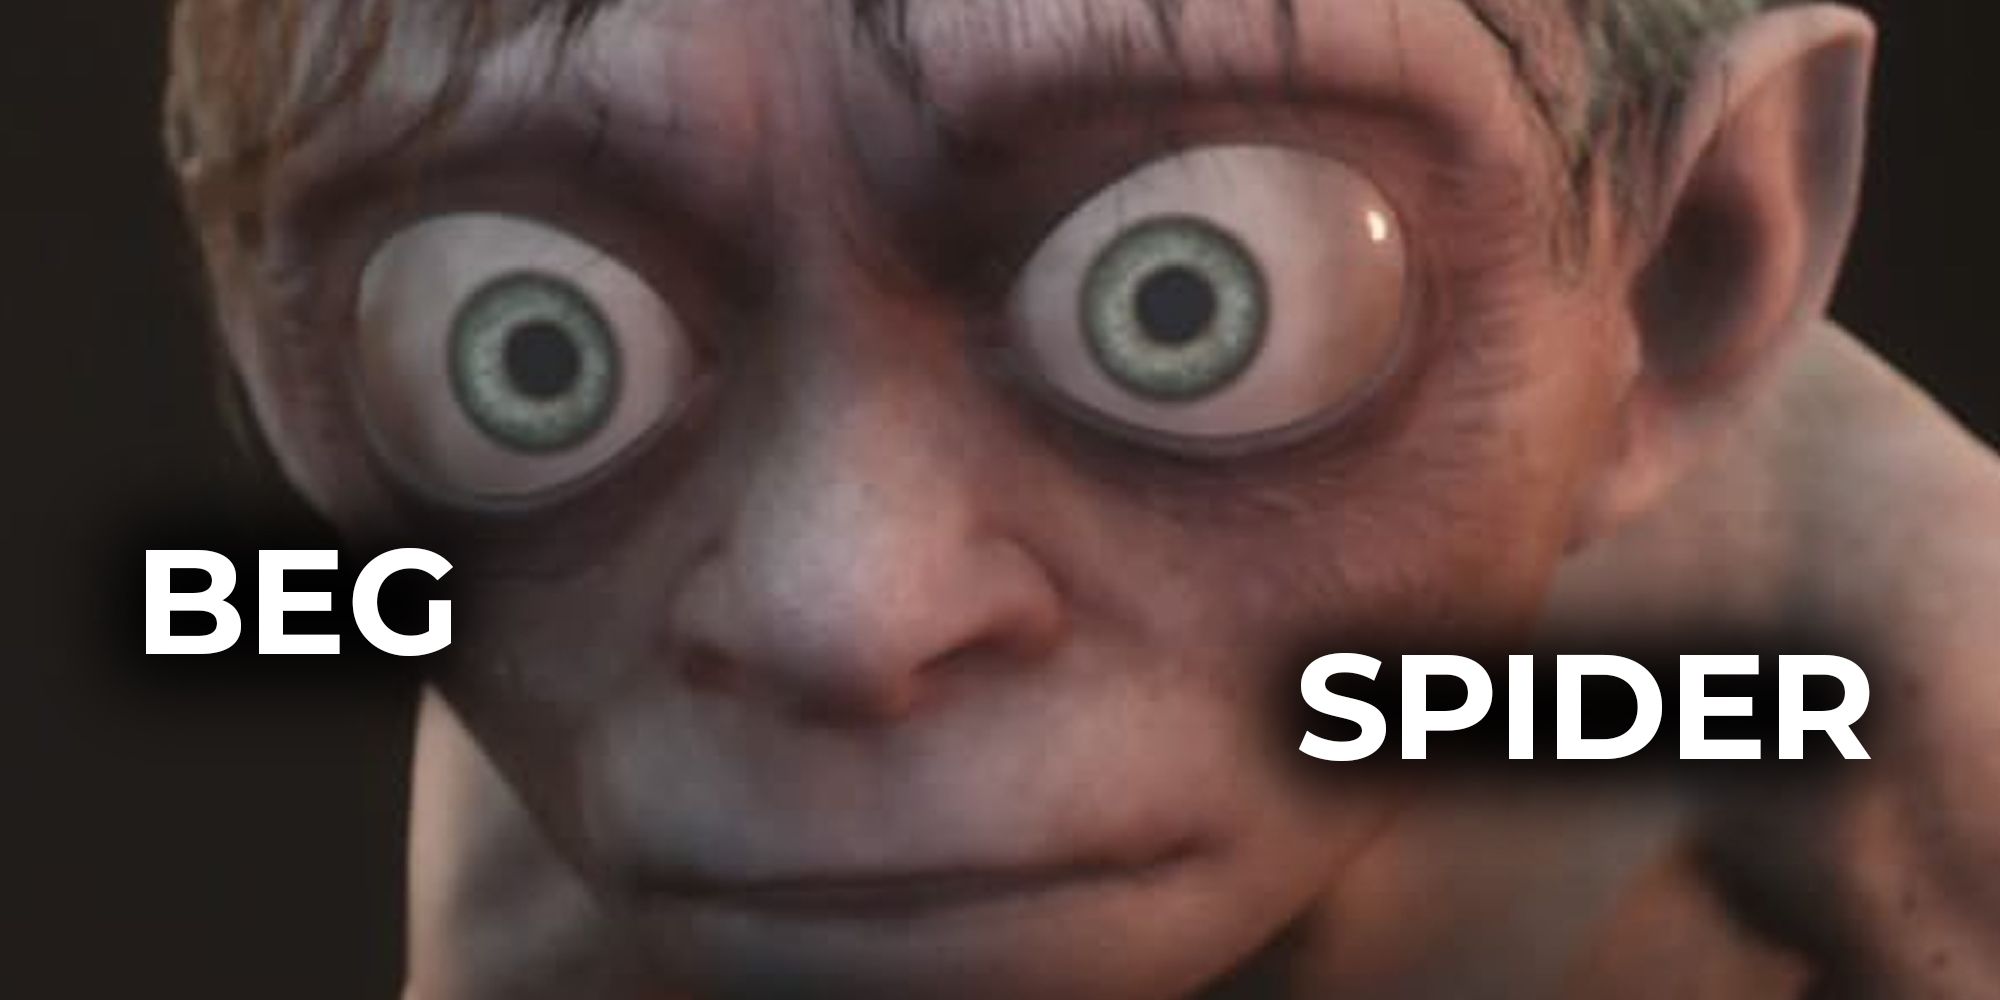 Gollum looking wide-eyed past the camera with the word 'BEG' on the left and the word 'SPIDER' on the right.